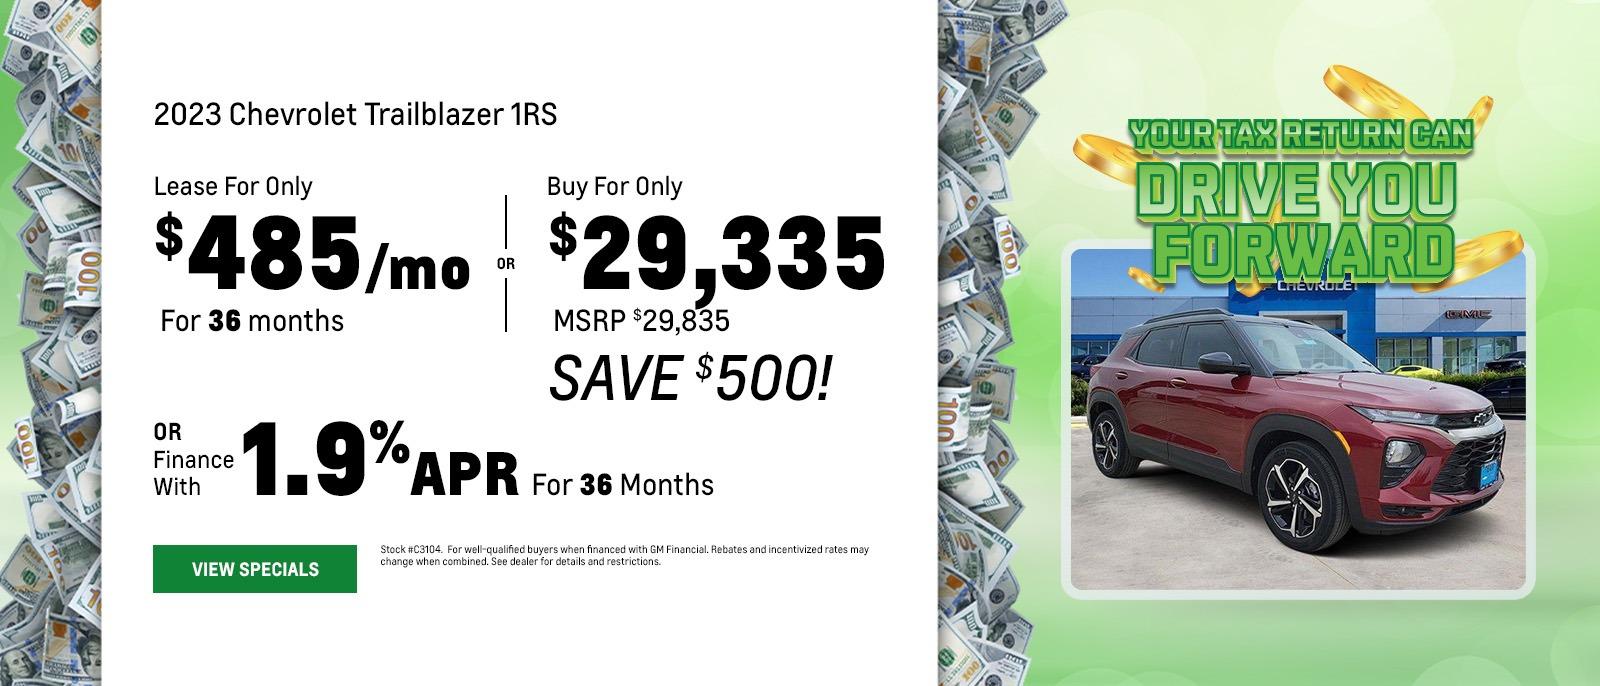 2023 Chevrolet Trailblazer 1RS Lease For Only $485/mo For 36 months OR Buy For Only $29,335 MSRP $29,835 SAVE $500! OR Finance With 1.9% APR  For 36 Months